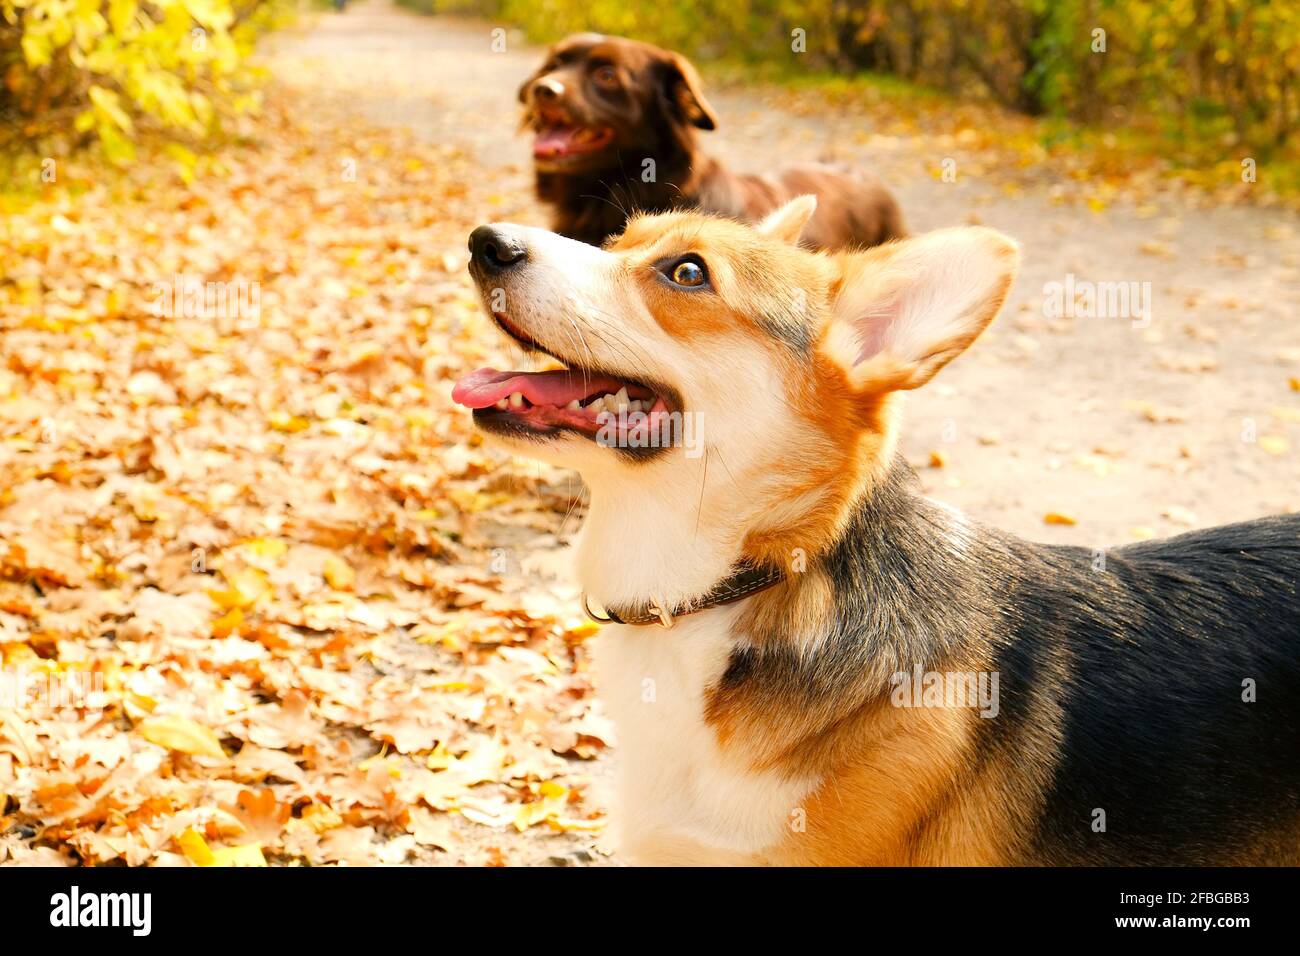 Pembroke welsh corgi on a walk in the park on nice warm autumn day. Two different breed dogs playing outdoors, many fallen yellow leaves on ground. Co Stock Photo